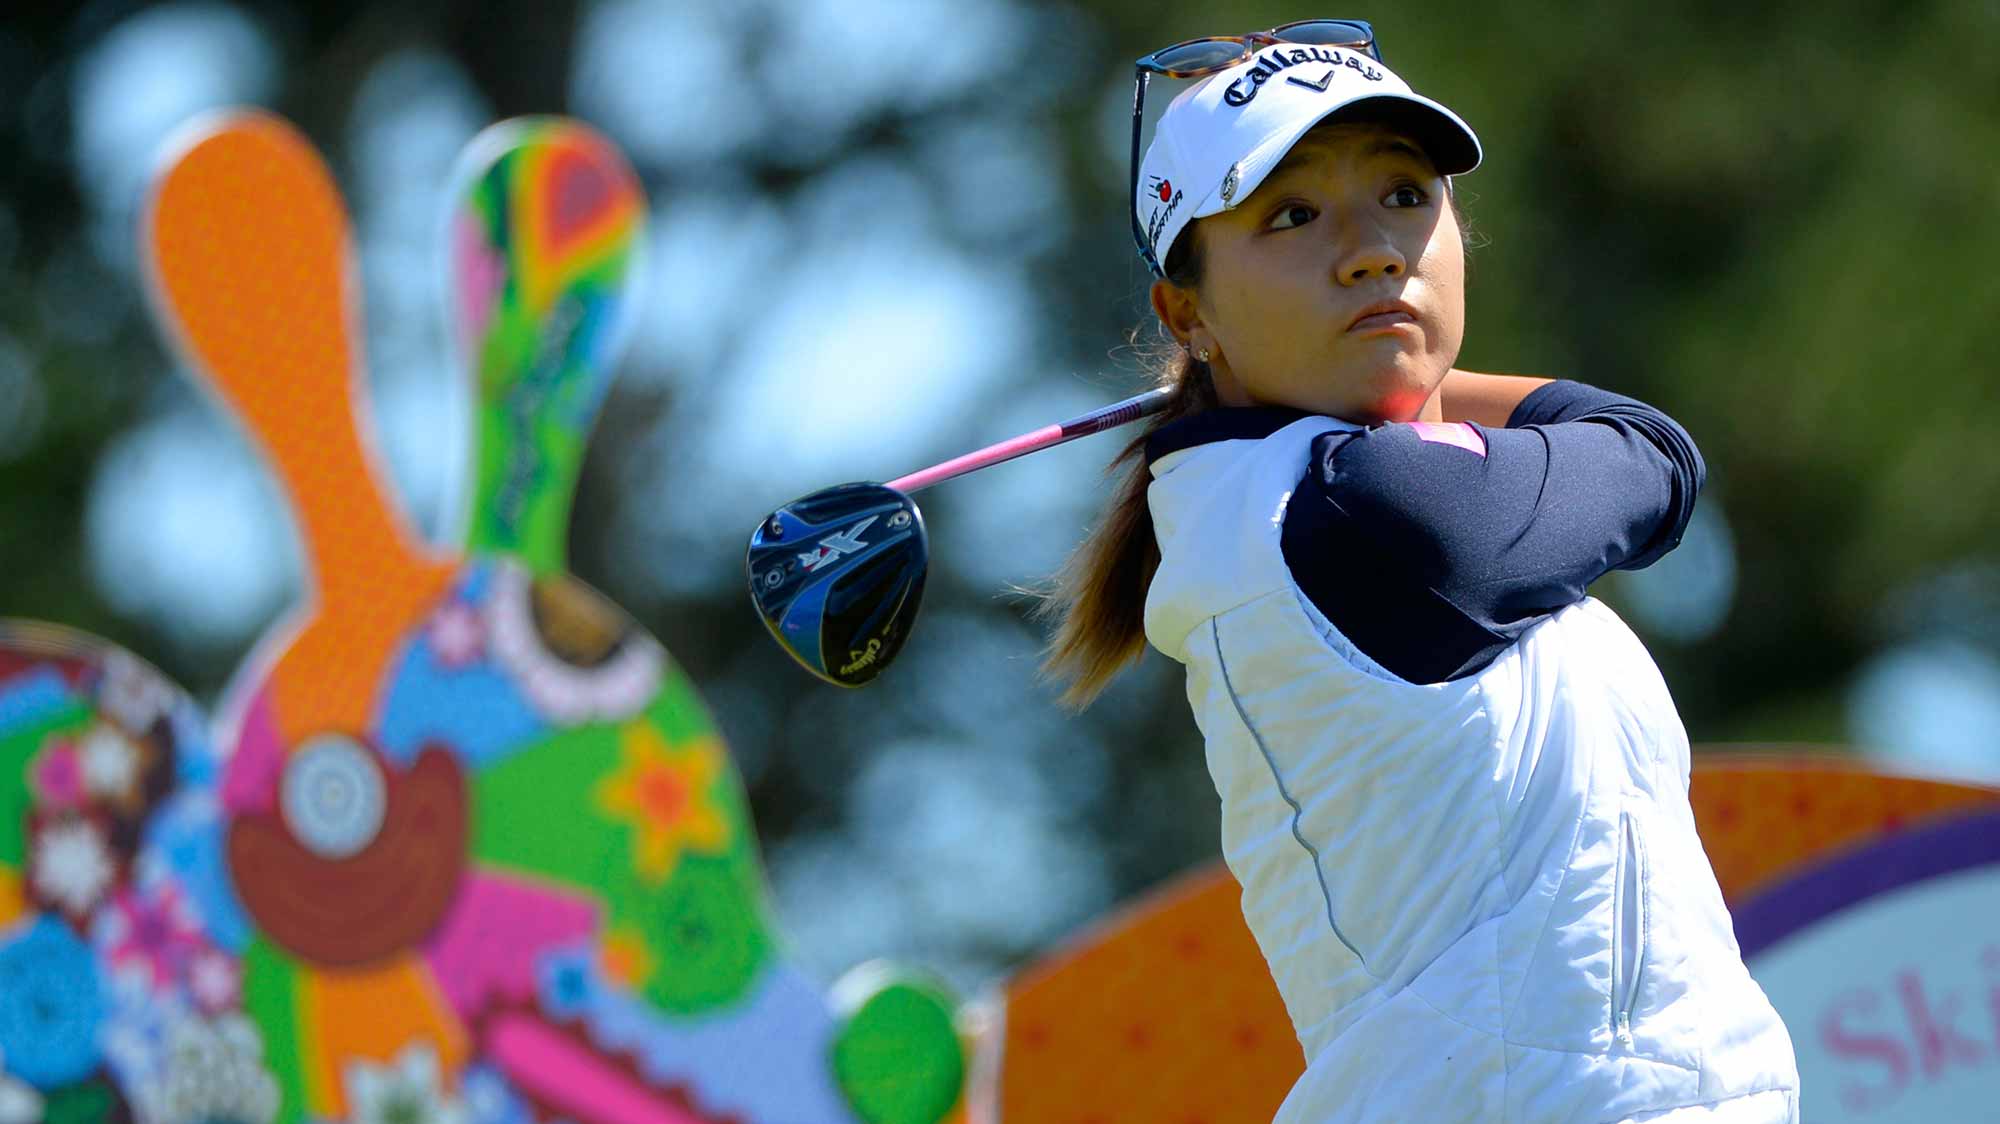 Lydia Ko of New Zealand makes a tee shot on the fifth hole during round three of the Swinging Skirts LPGA Classic presented by CTBC at the Lake Merced Golf Club